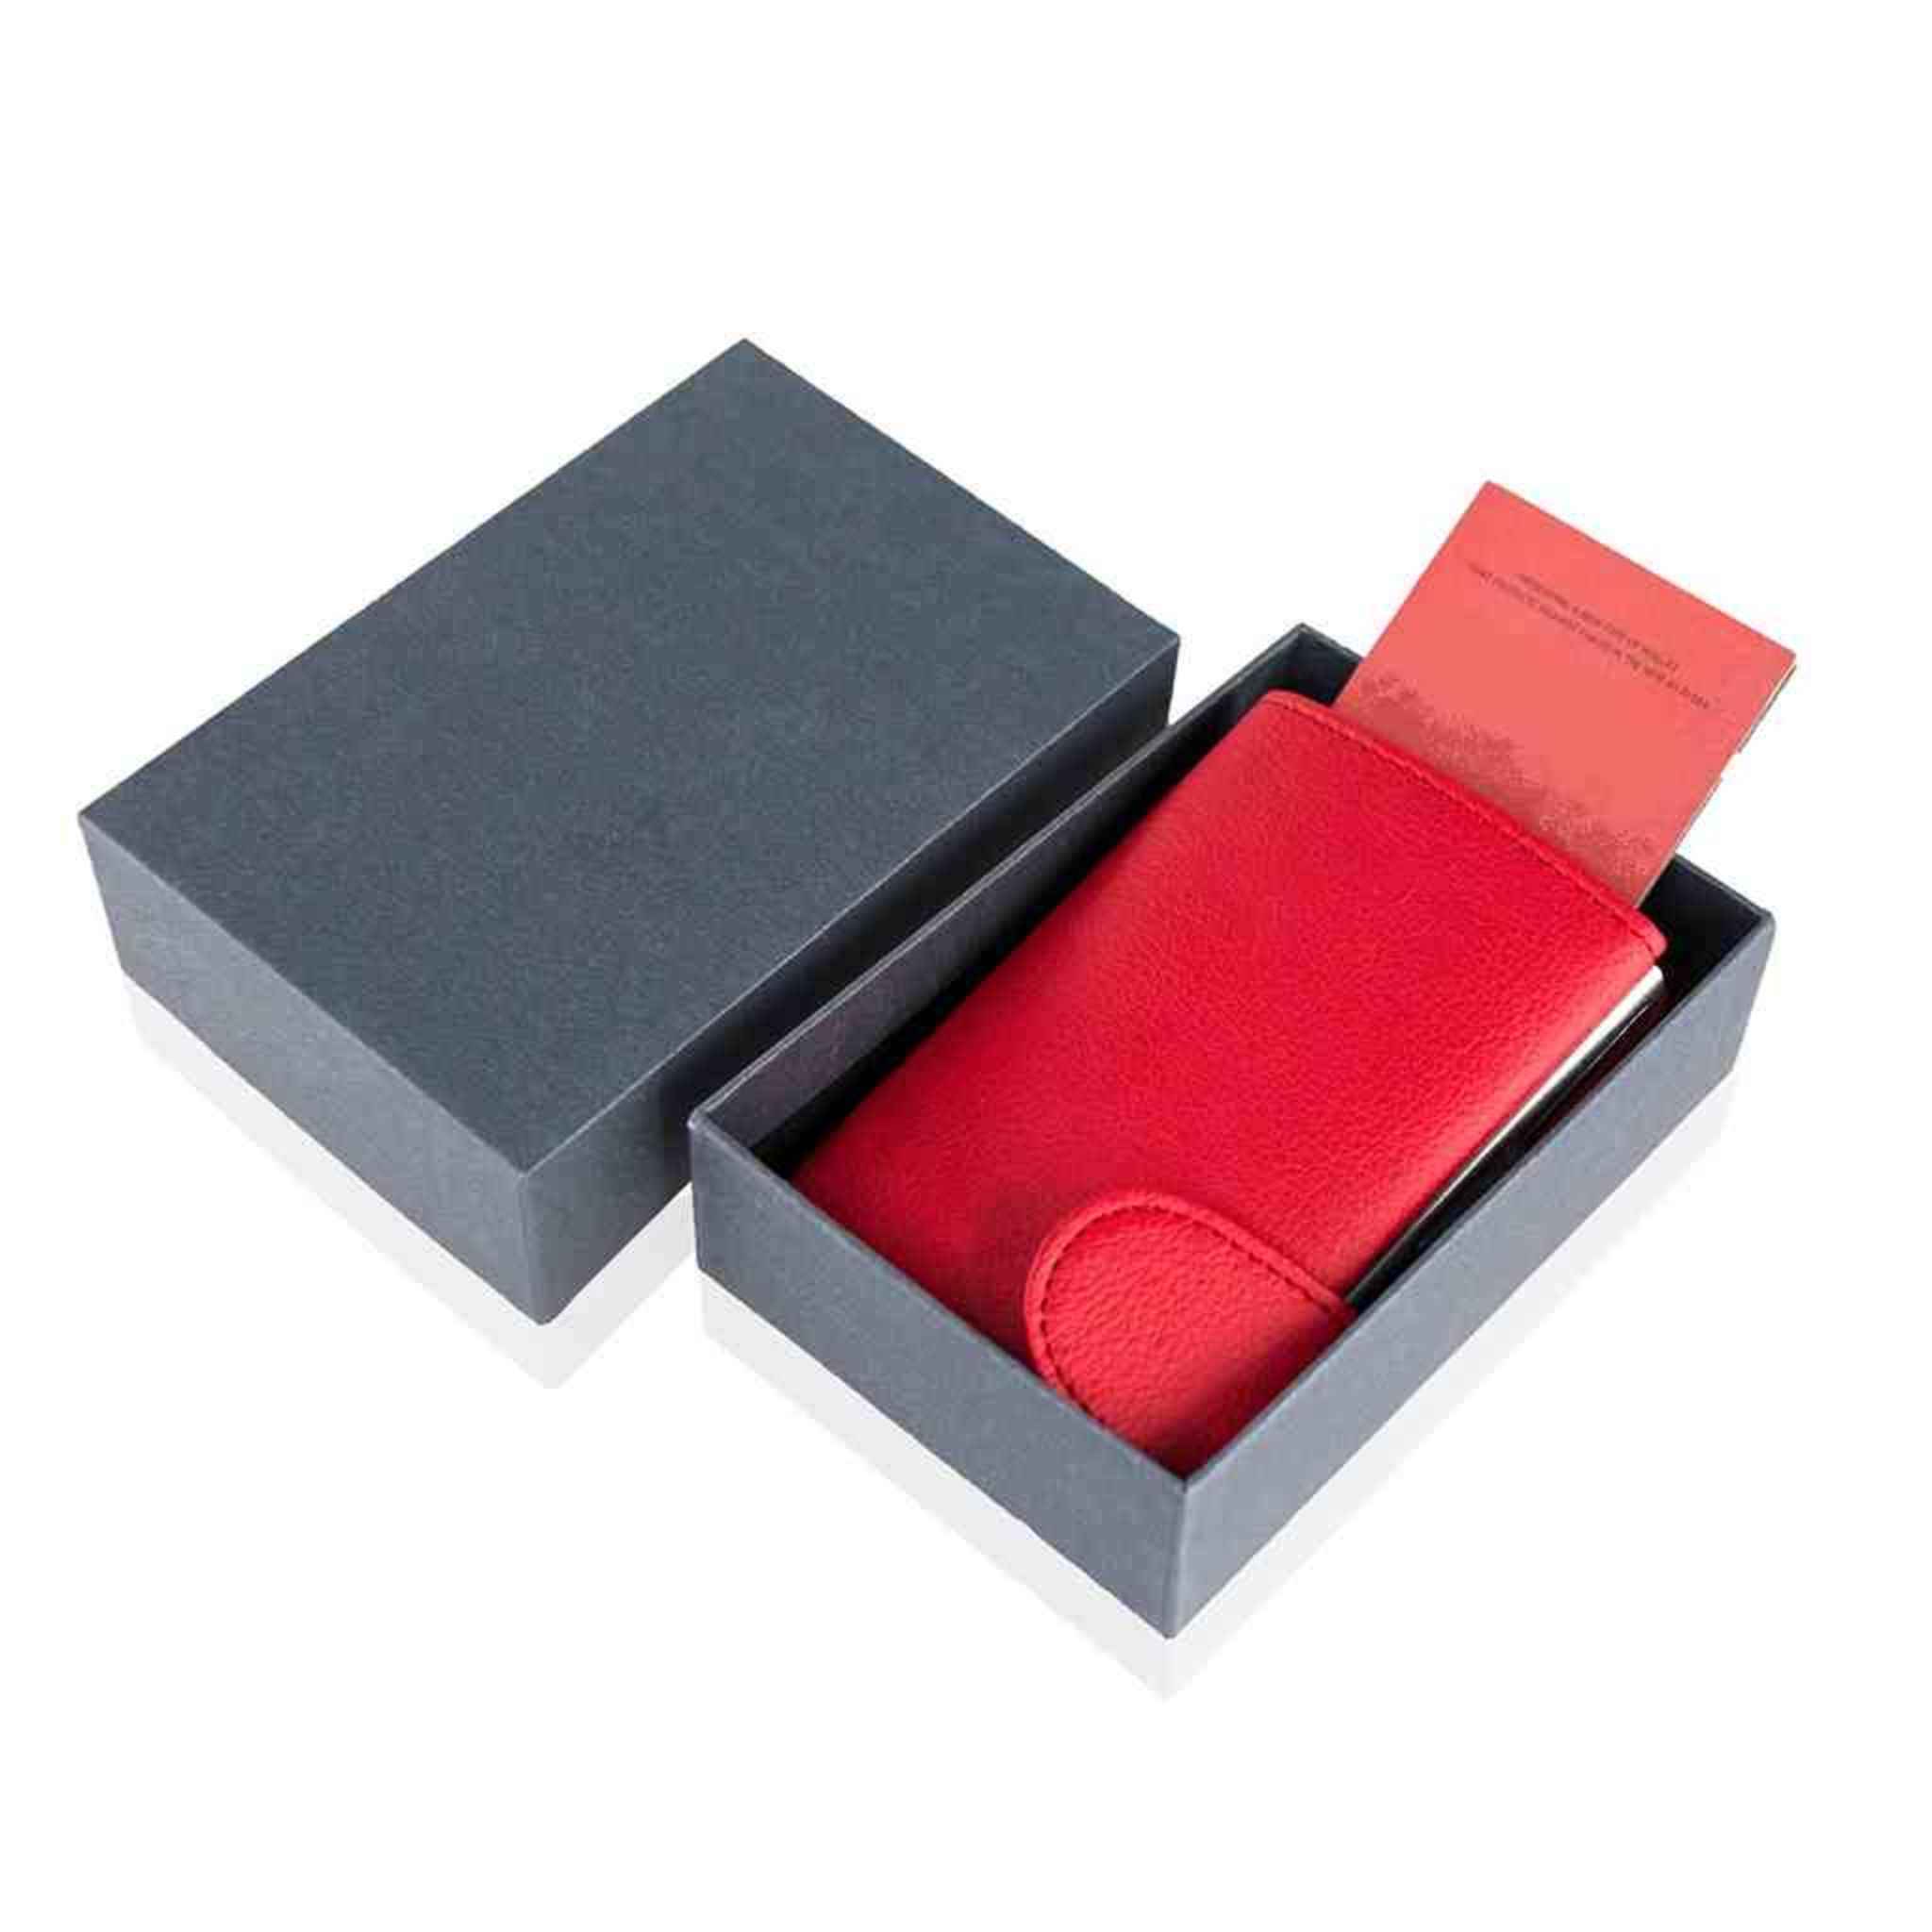 Card holder and wallet with packaging box